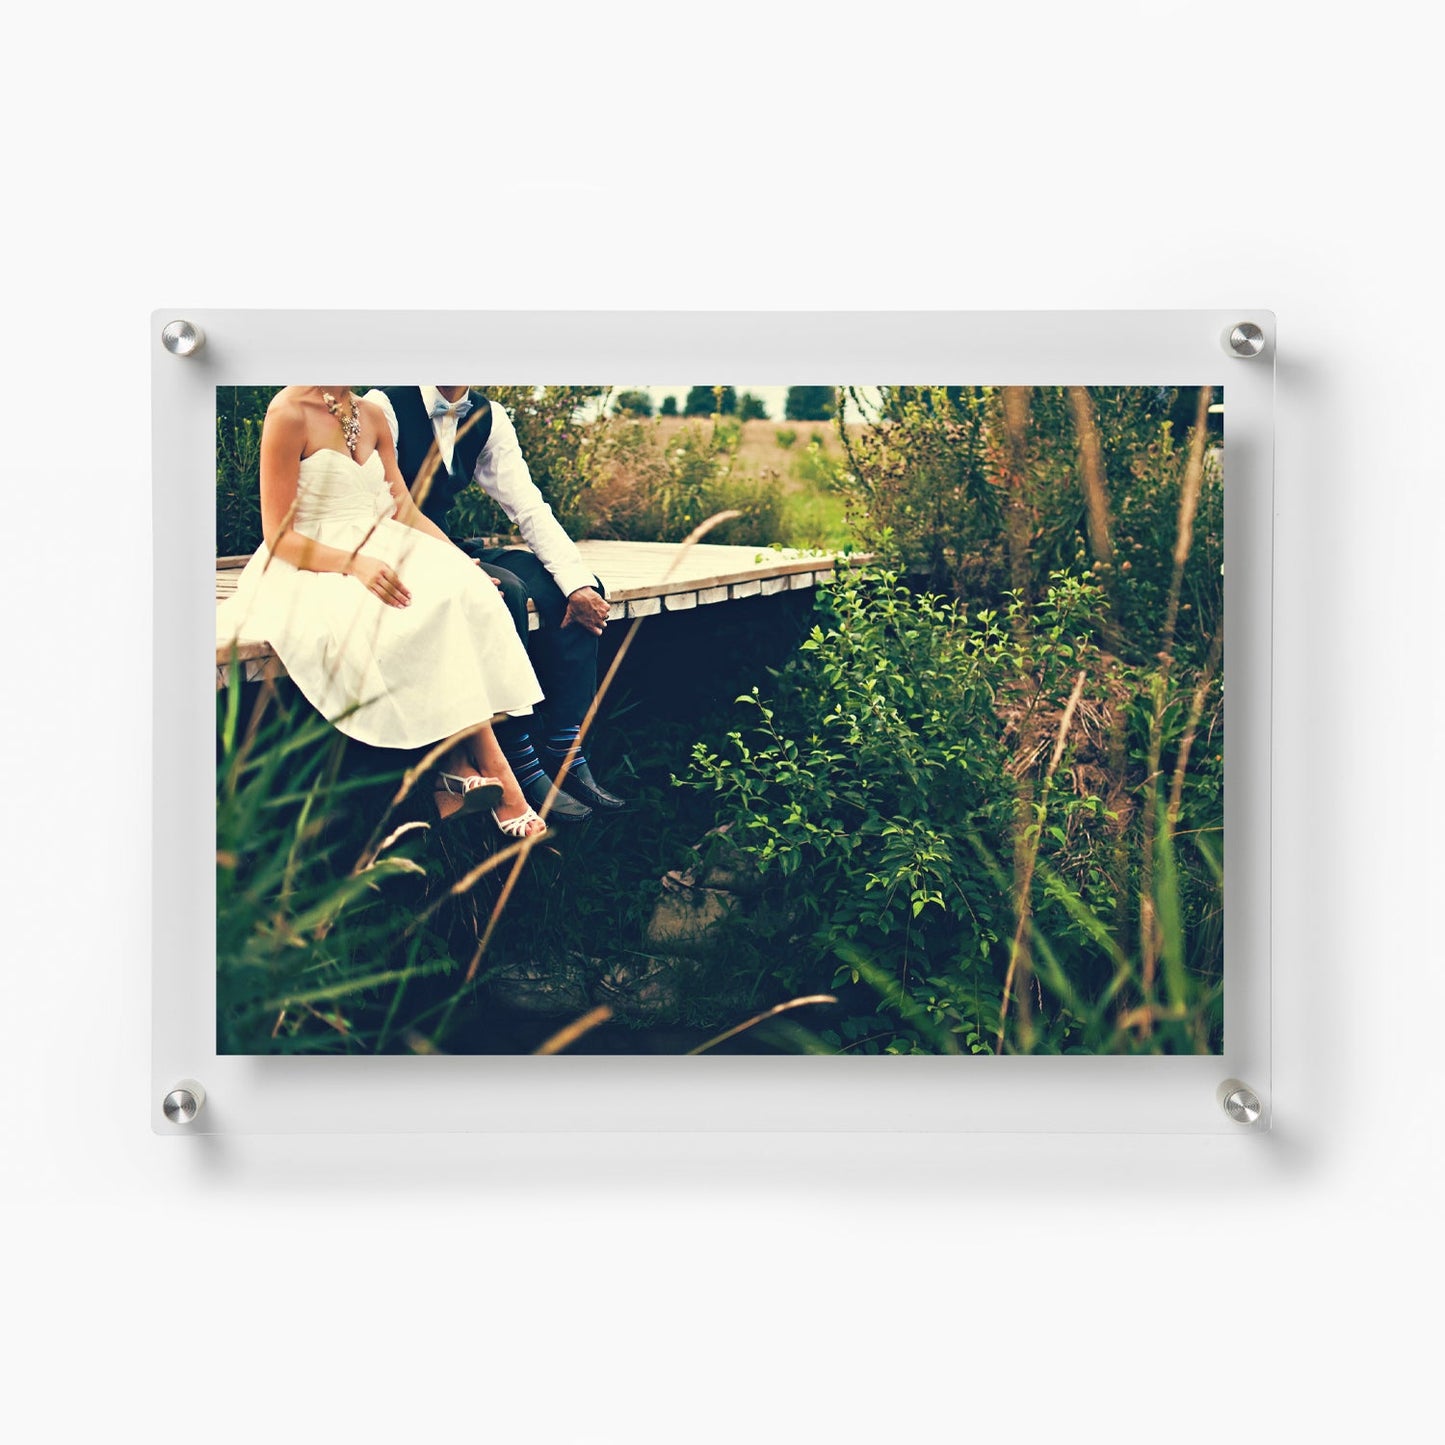 WS Double: 15" x 21" Double Panel Frame